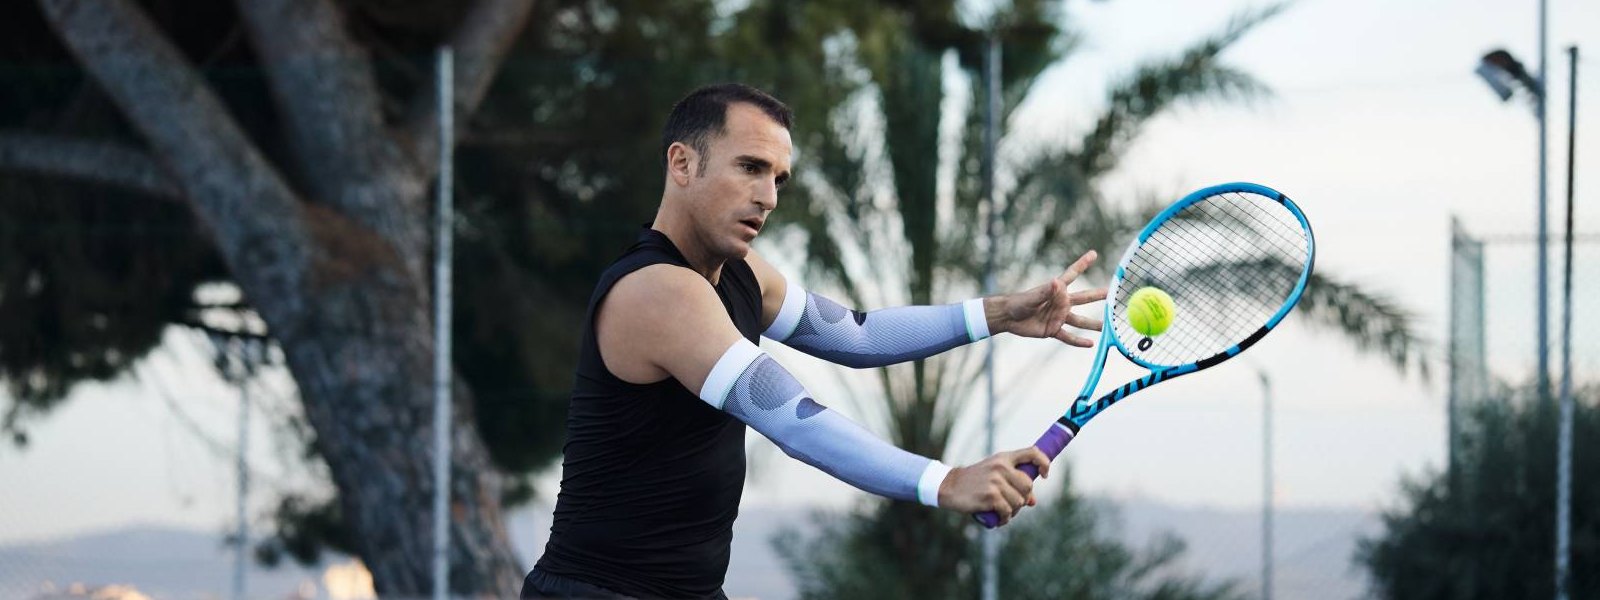 Tennis player with white arm sleeves plays tennis and beats a ball with the backhand